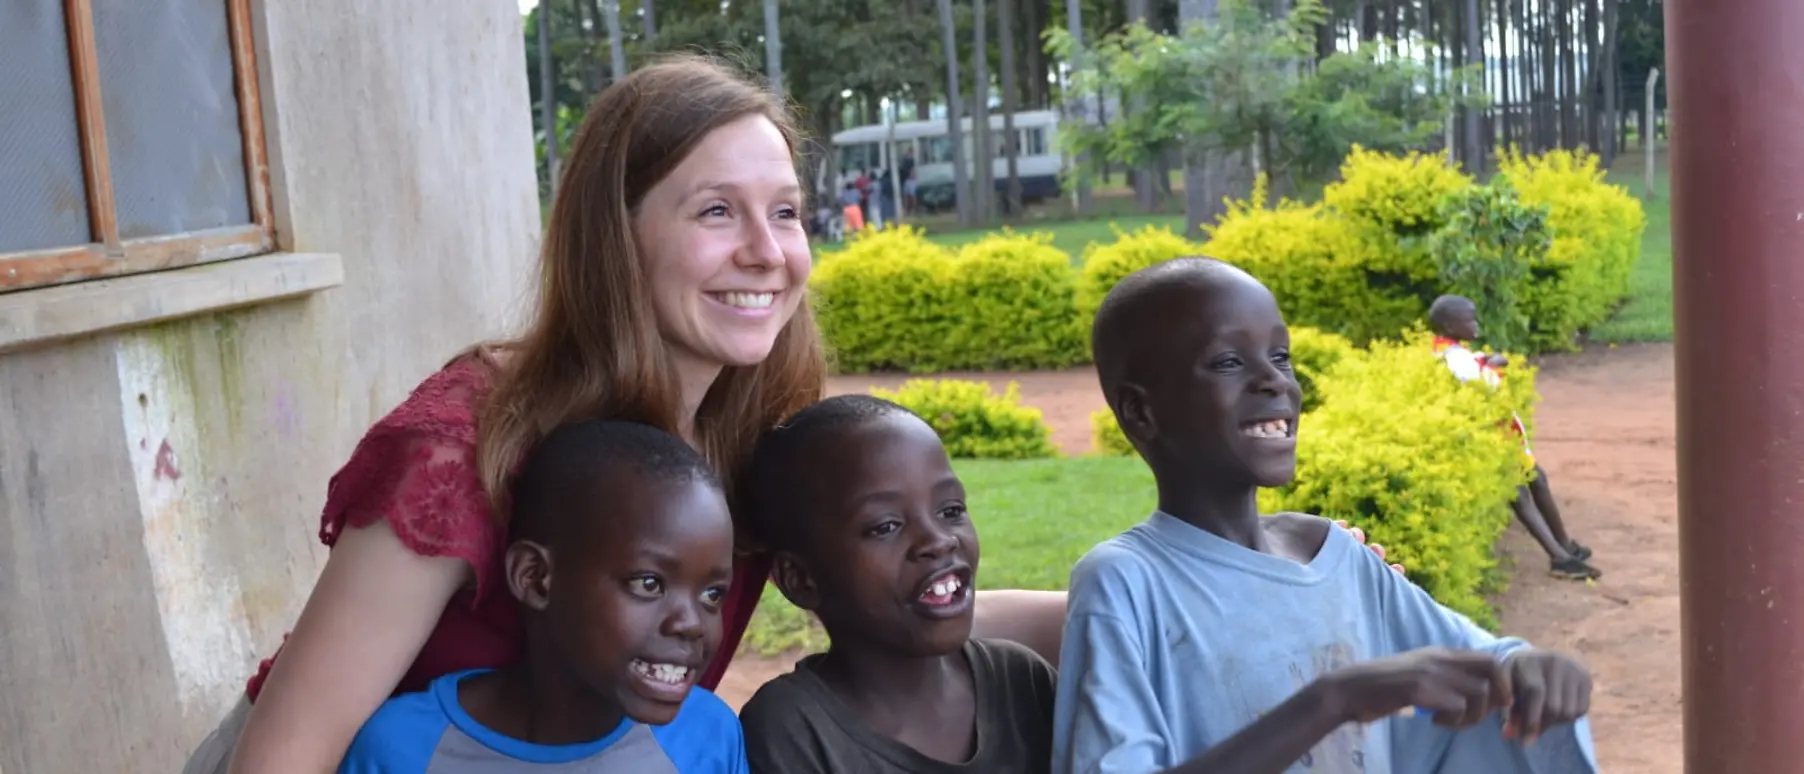 Henkel employee Monika Böhnke is posing for a photo with three boys from Sonrise Ministries.